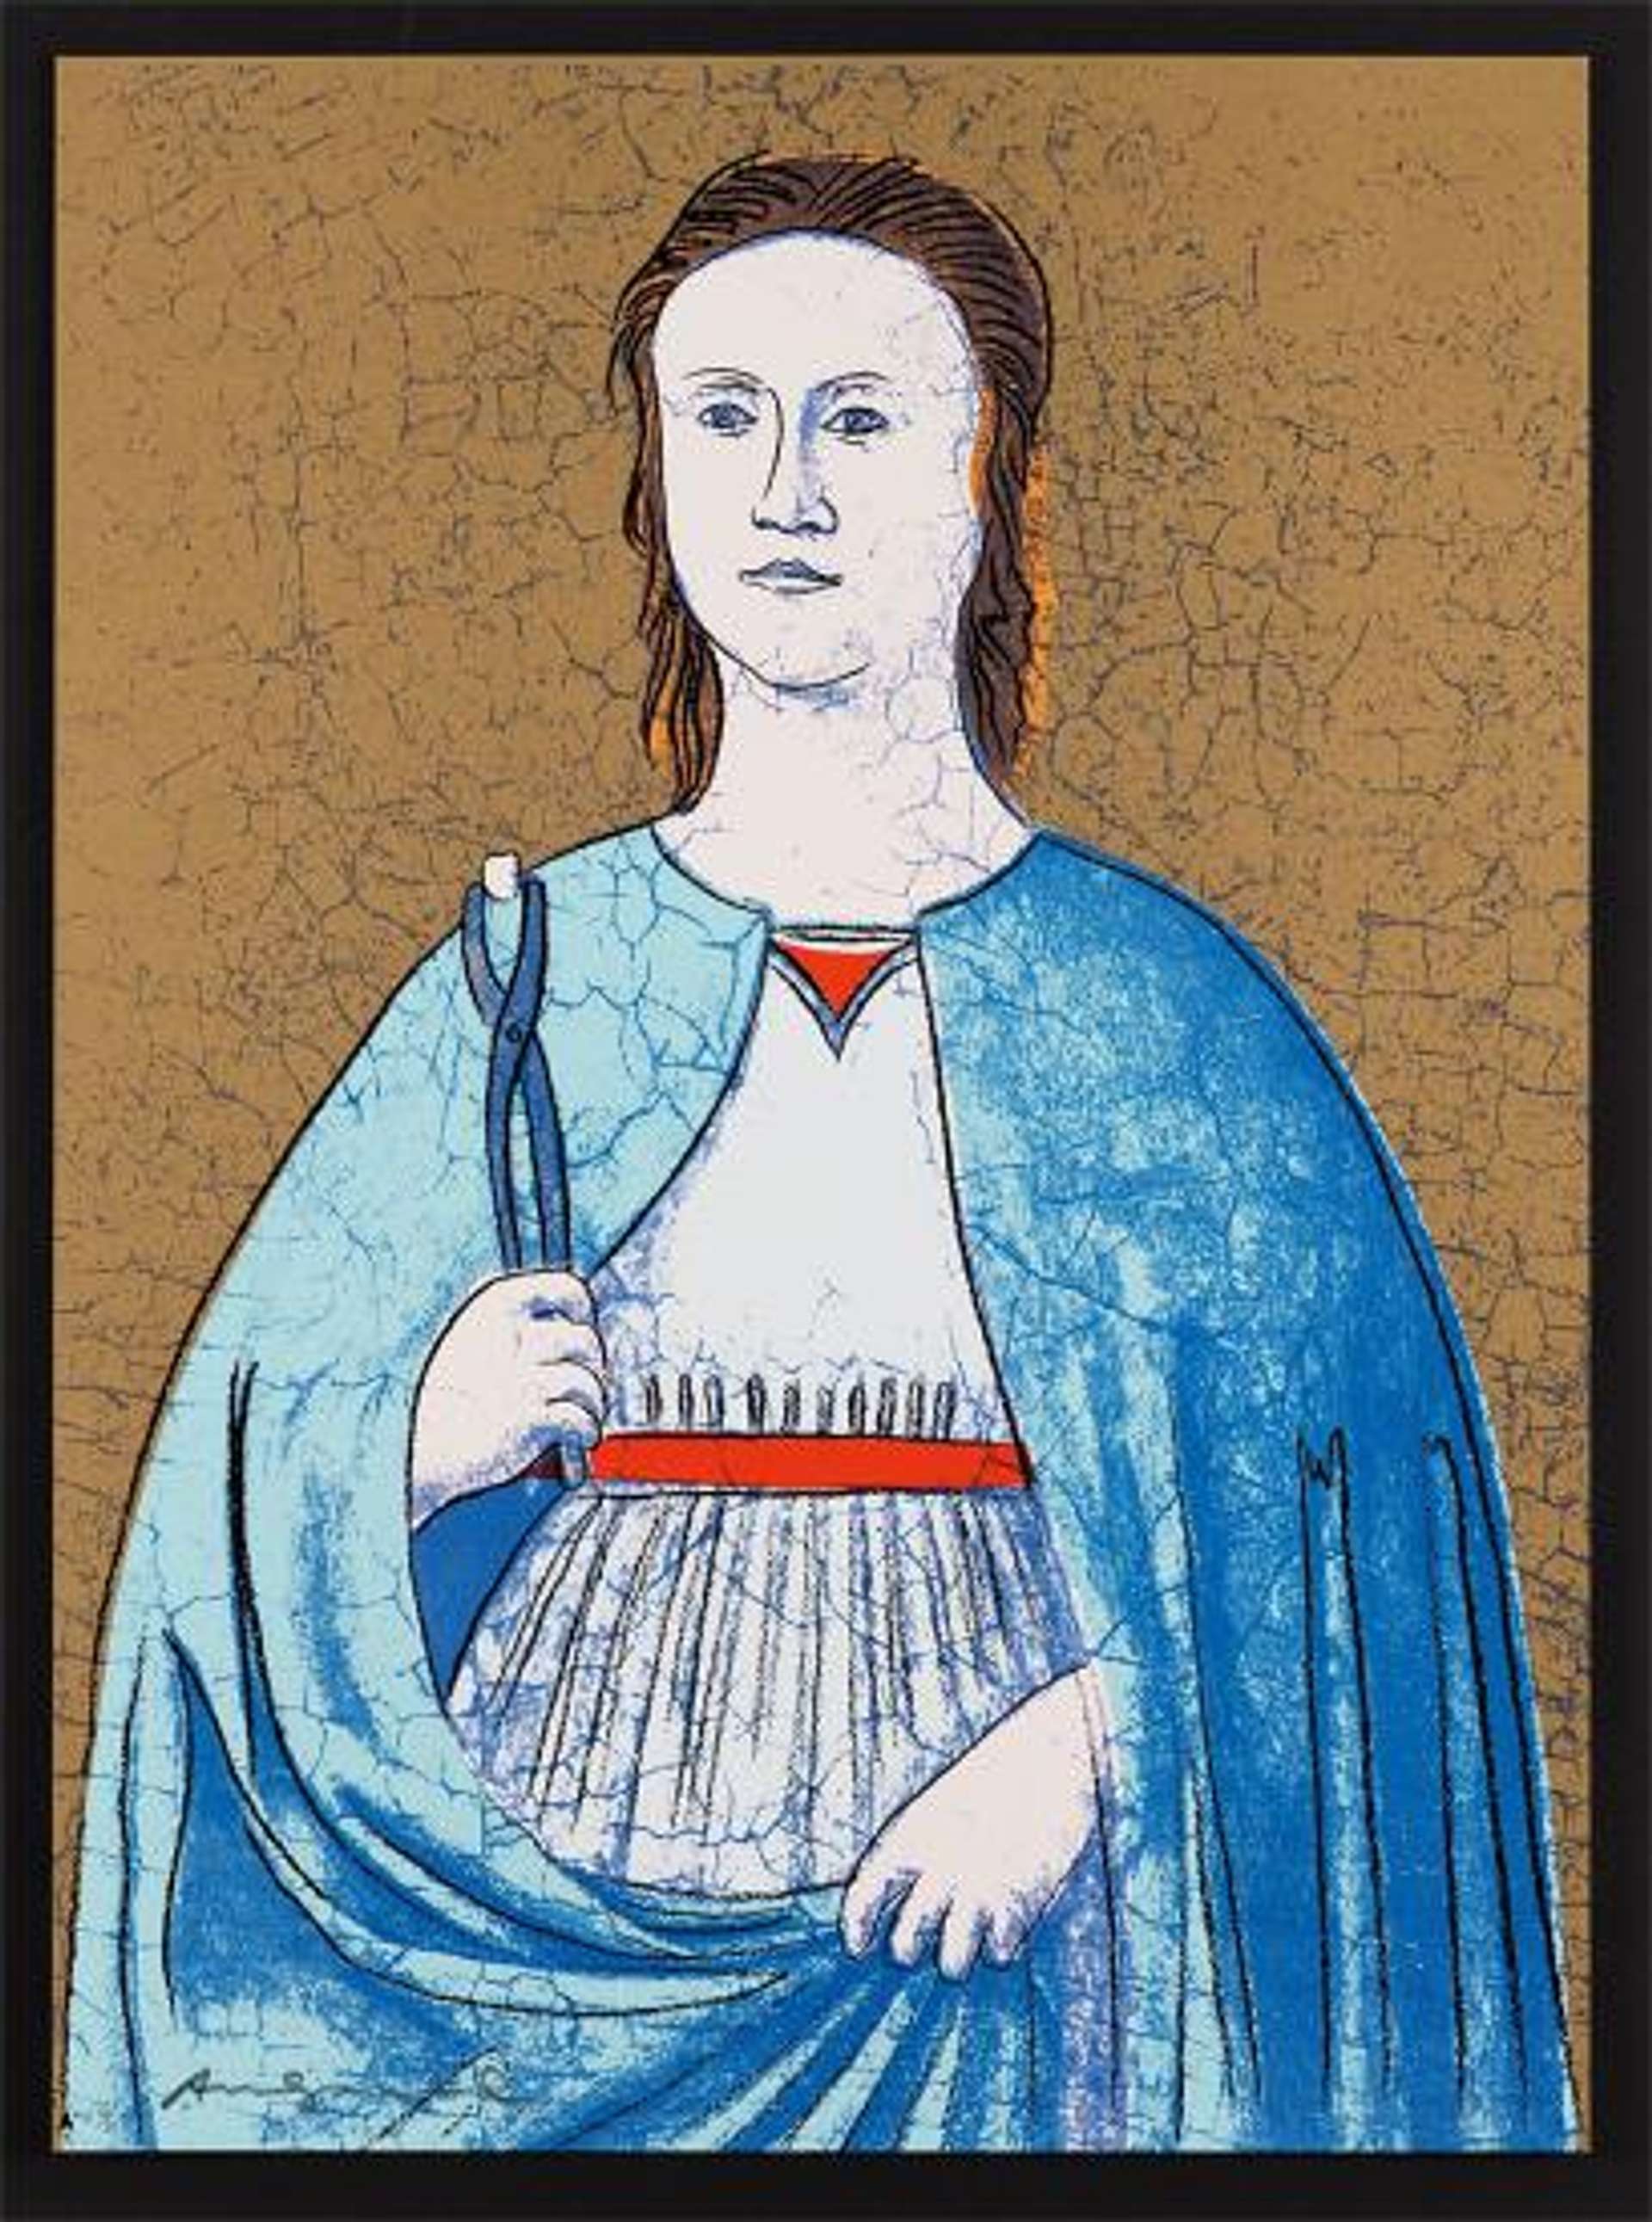 An image of Saint Apollonia by Andy Warhol, inspired by an artwork by Piero Della Francesca. The saint is shown in a blue mantle, holding a pair of tongs with a tooth on show.